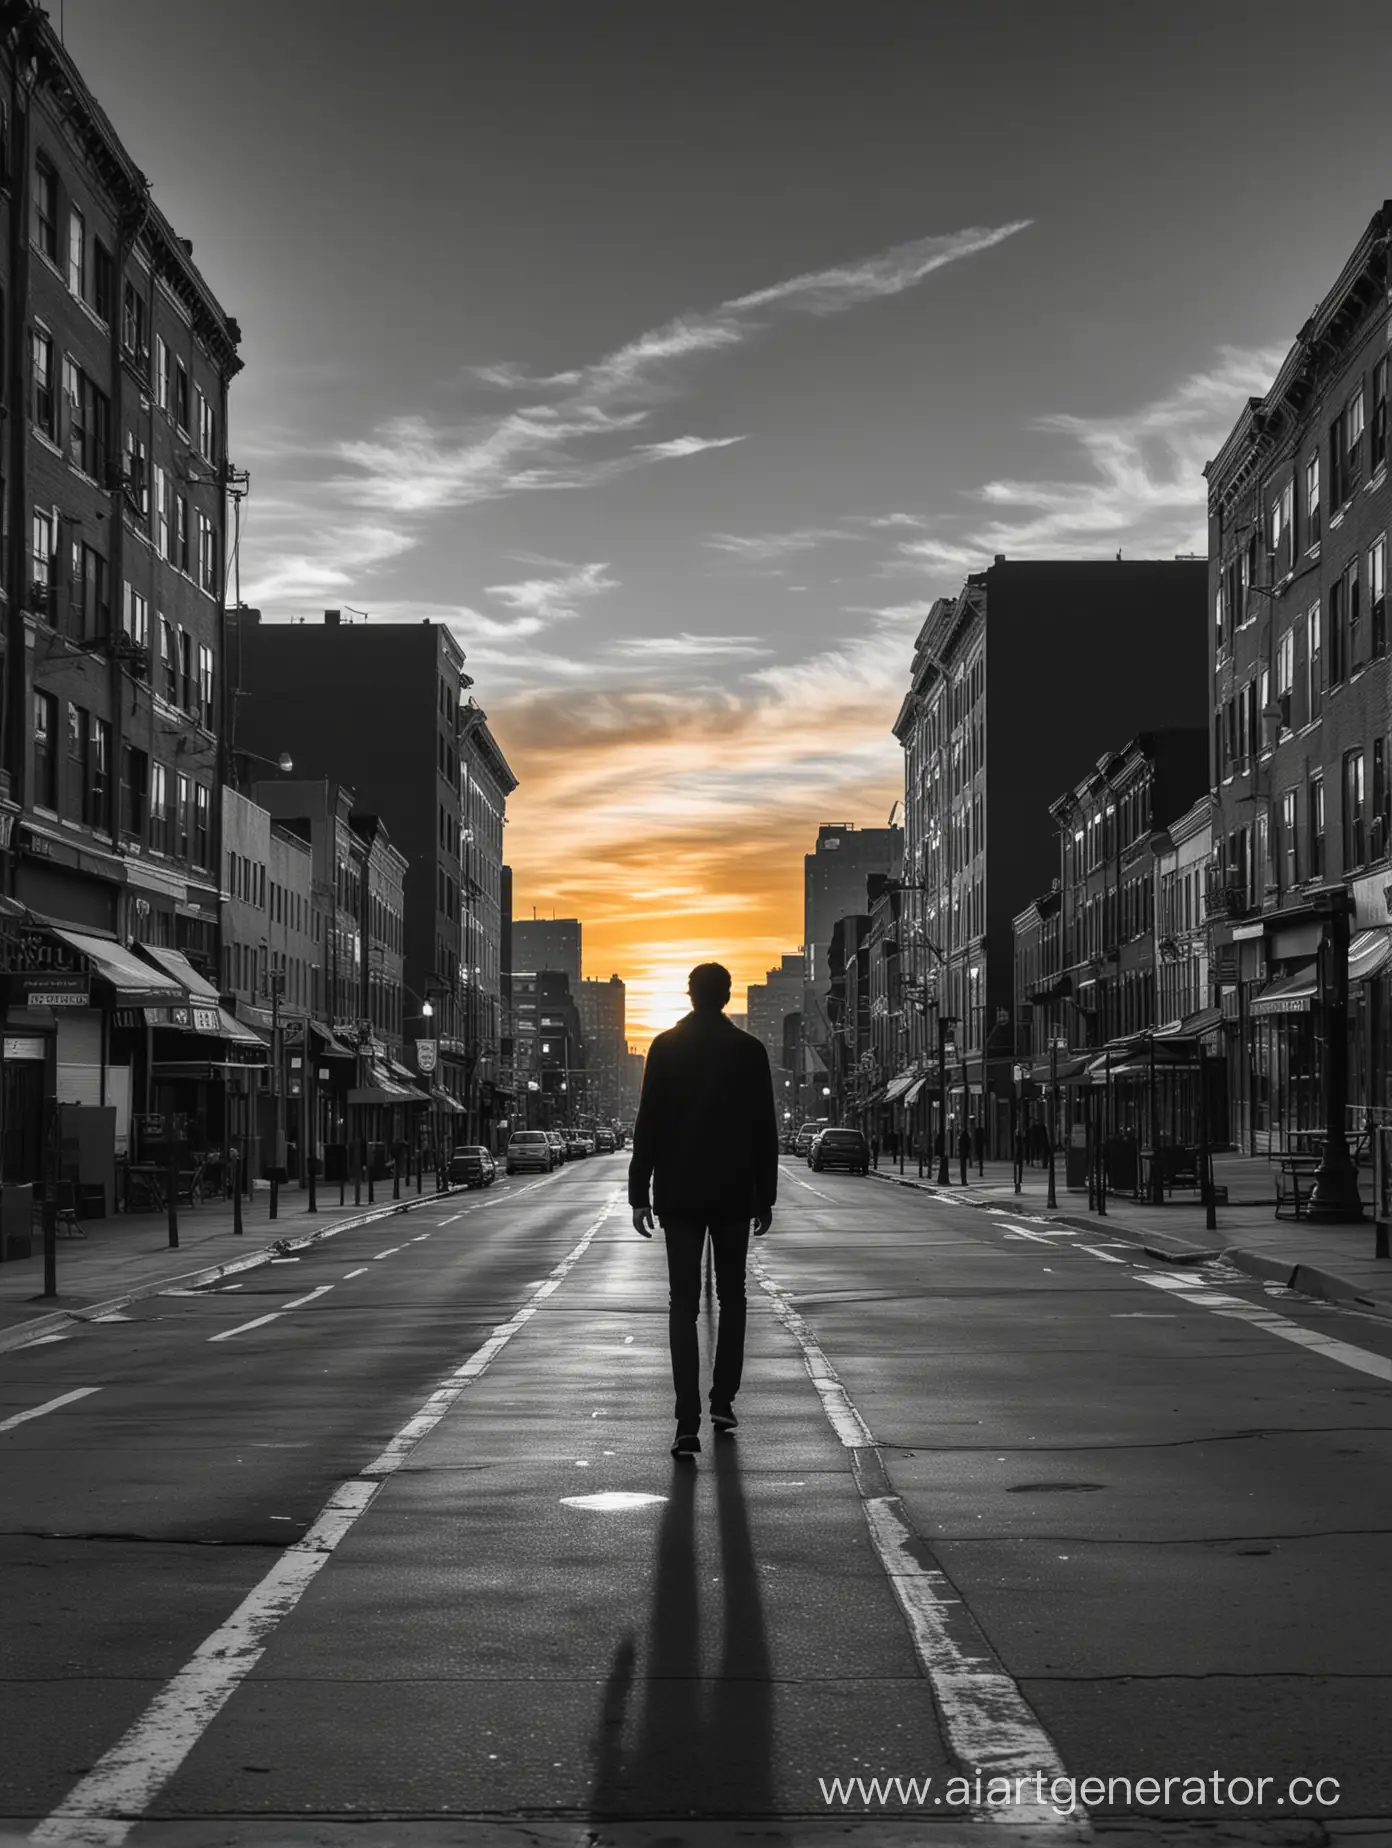 A faceless man walks down a city street with a sunset in the background. In the picture, only the sunset is in bright colors and the rest is in black and white colors.